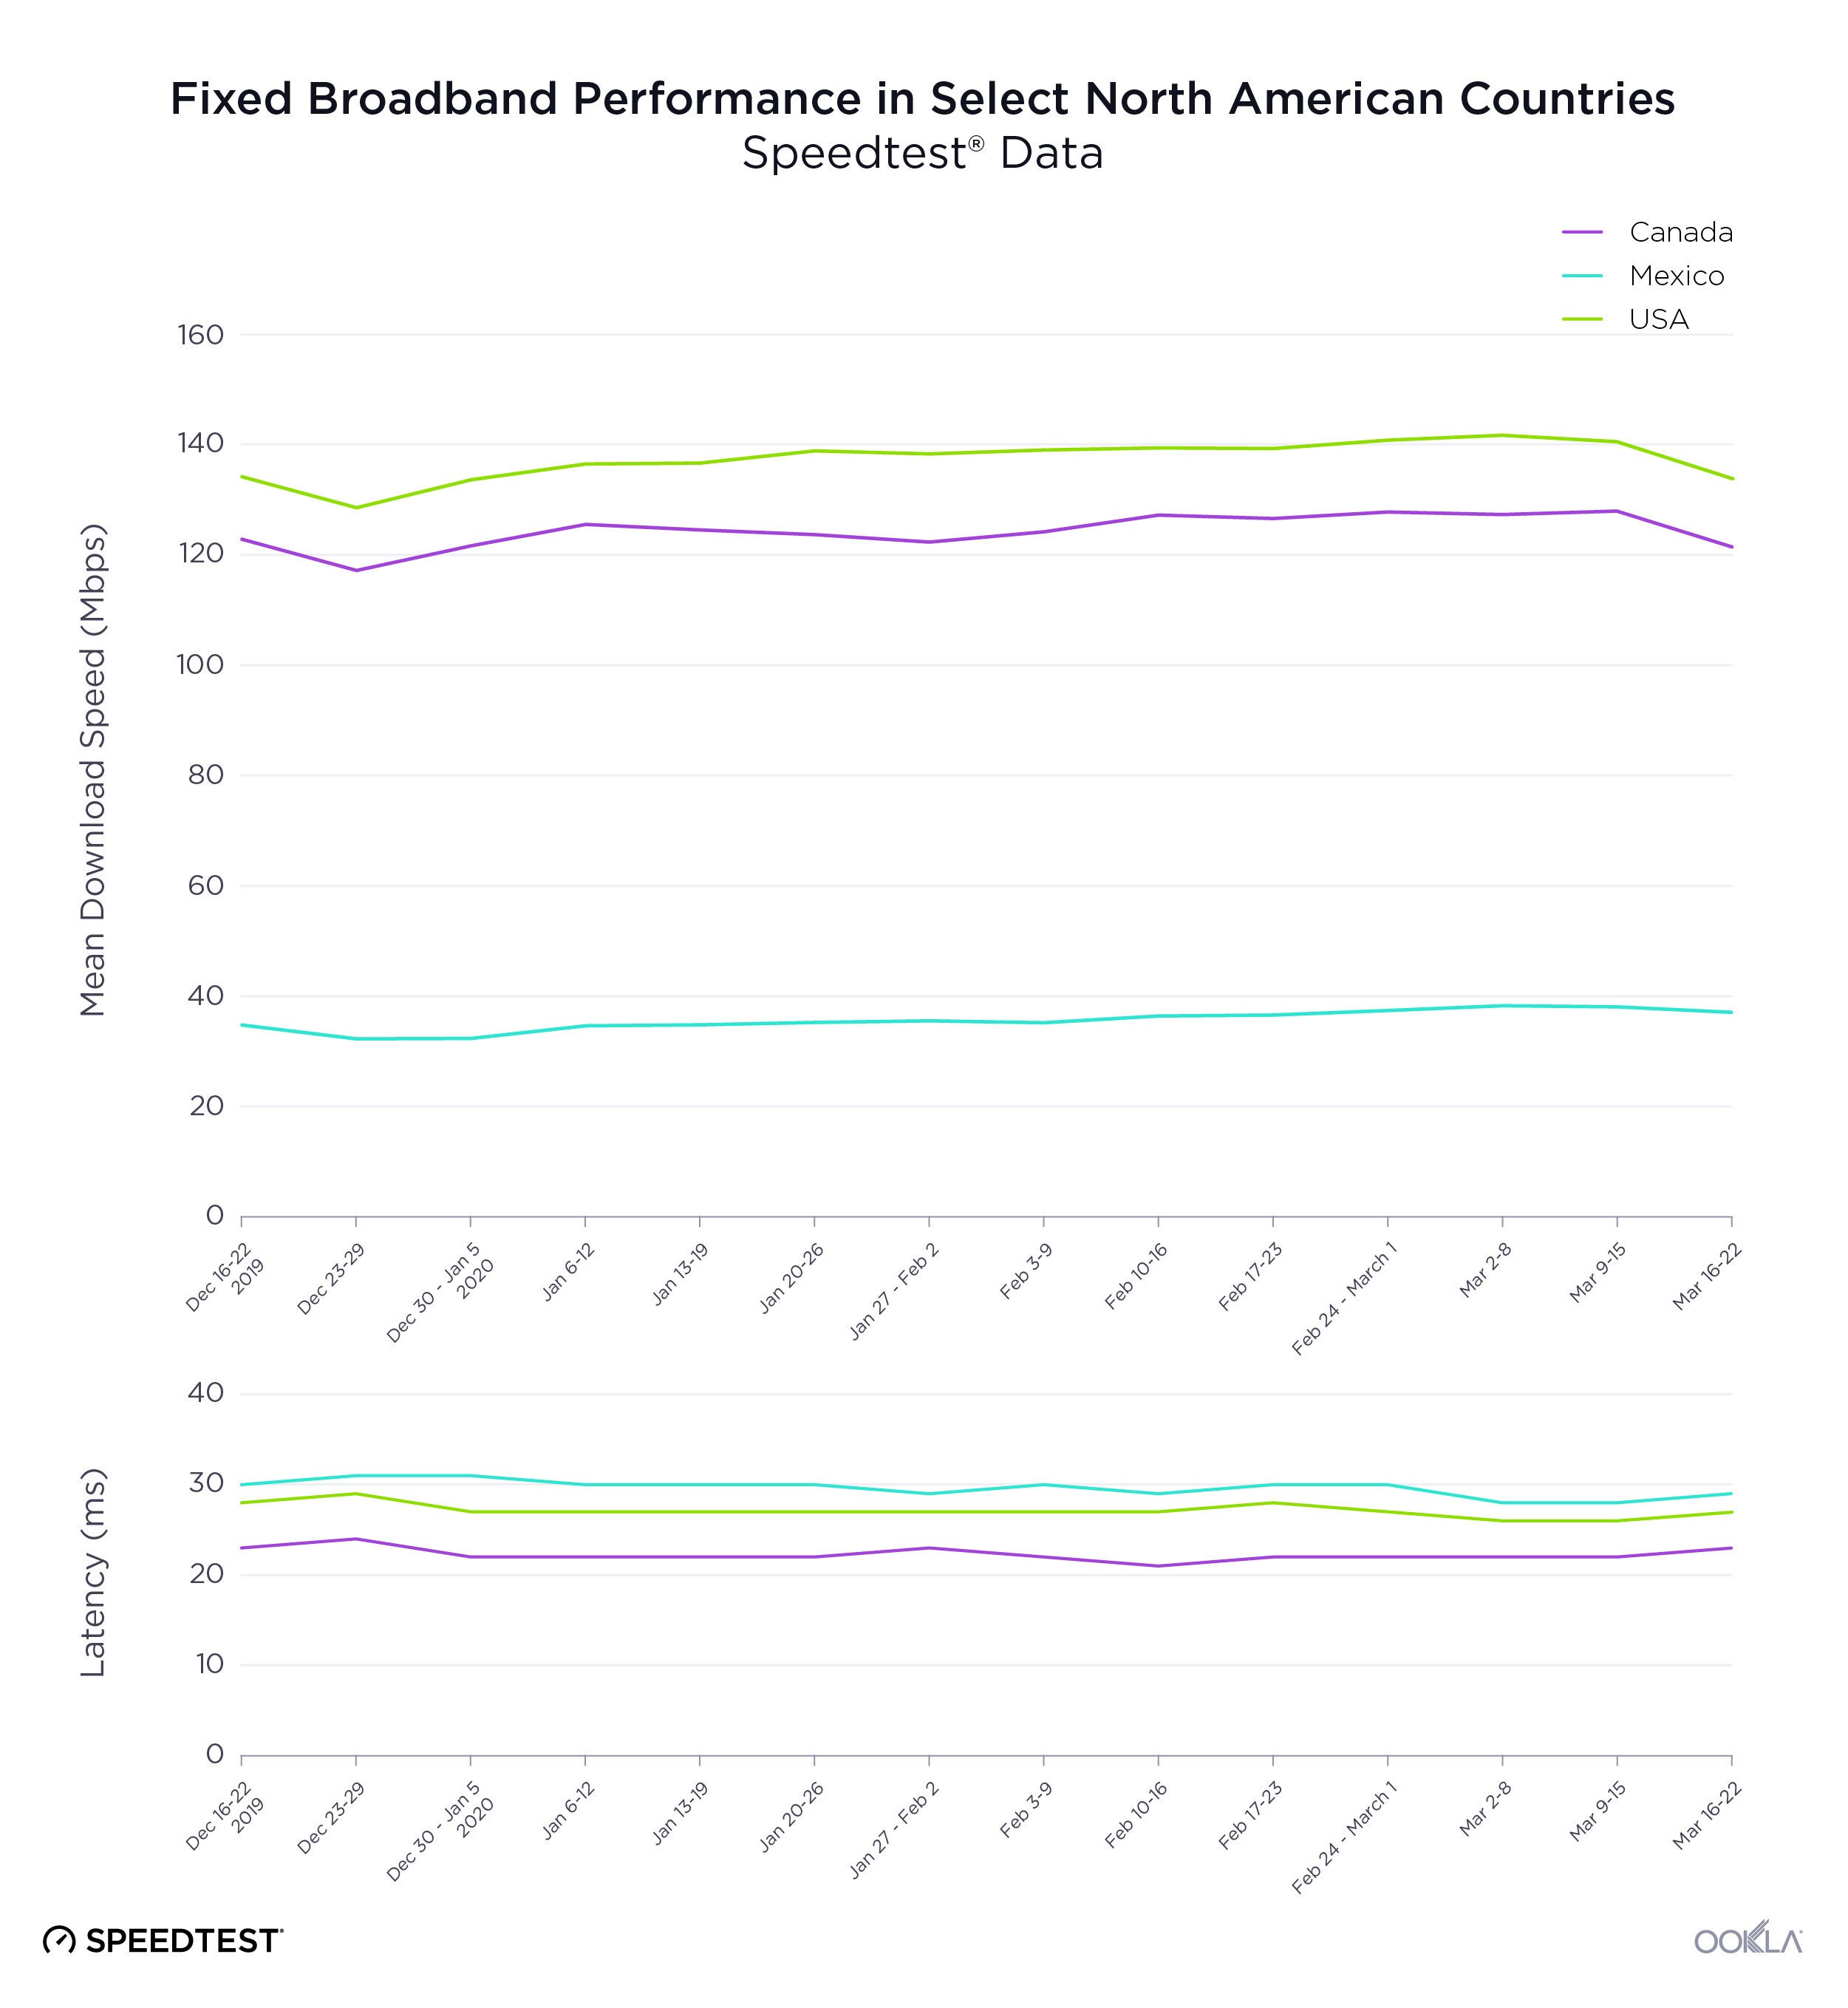 Internet speeds slightly decrease in the US and Europe amids COVID-19 lockdown